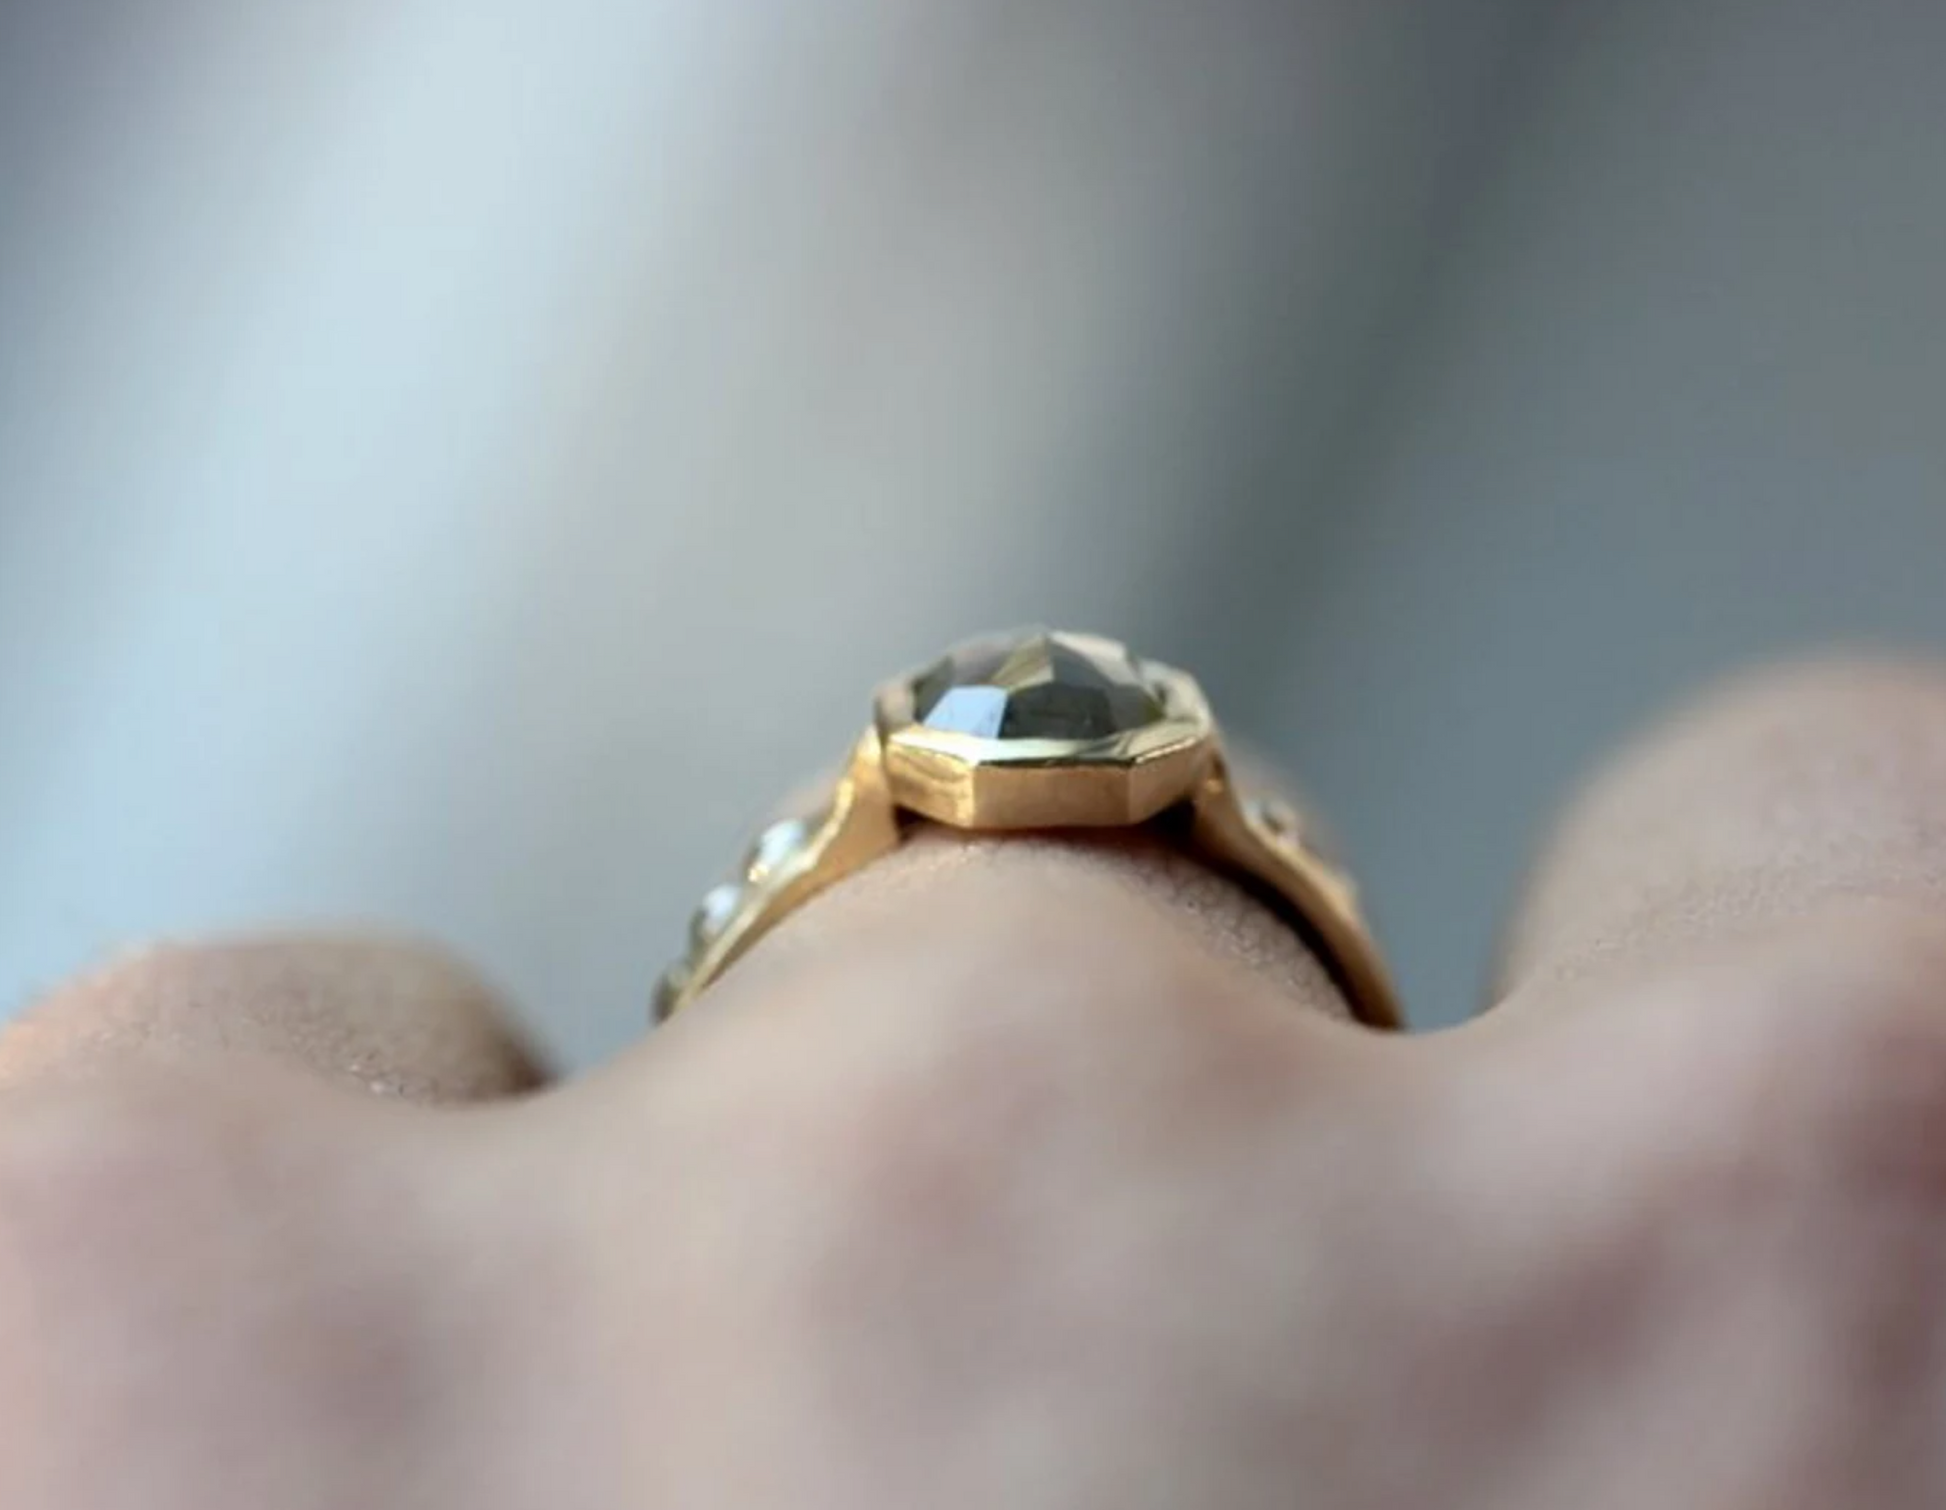 Handmade jewelry featuring a Rose Cut Gray Diamond Ring in 14k Yellow Gold, by Cassin Jewelry.